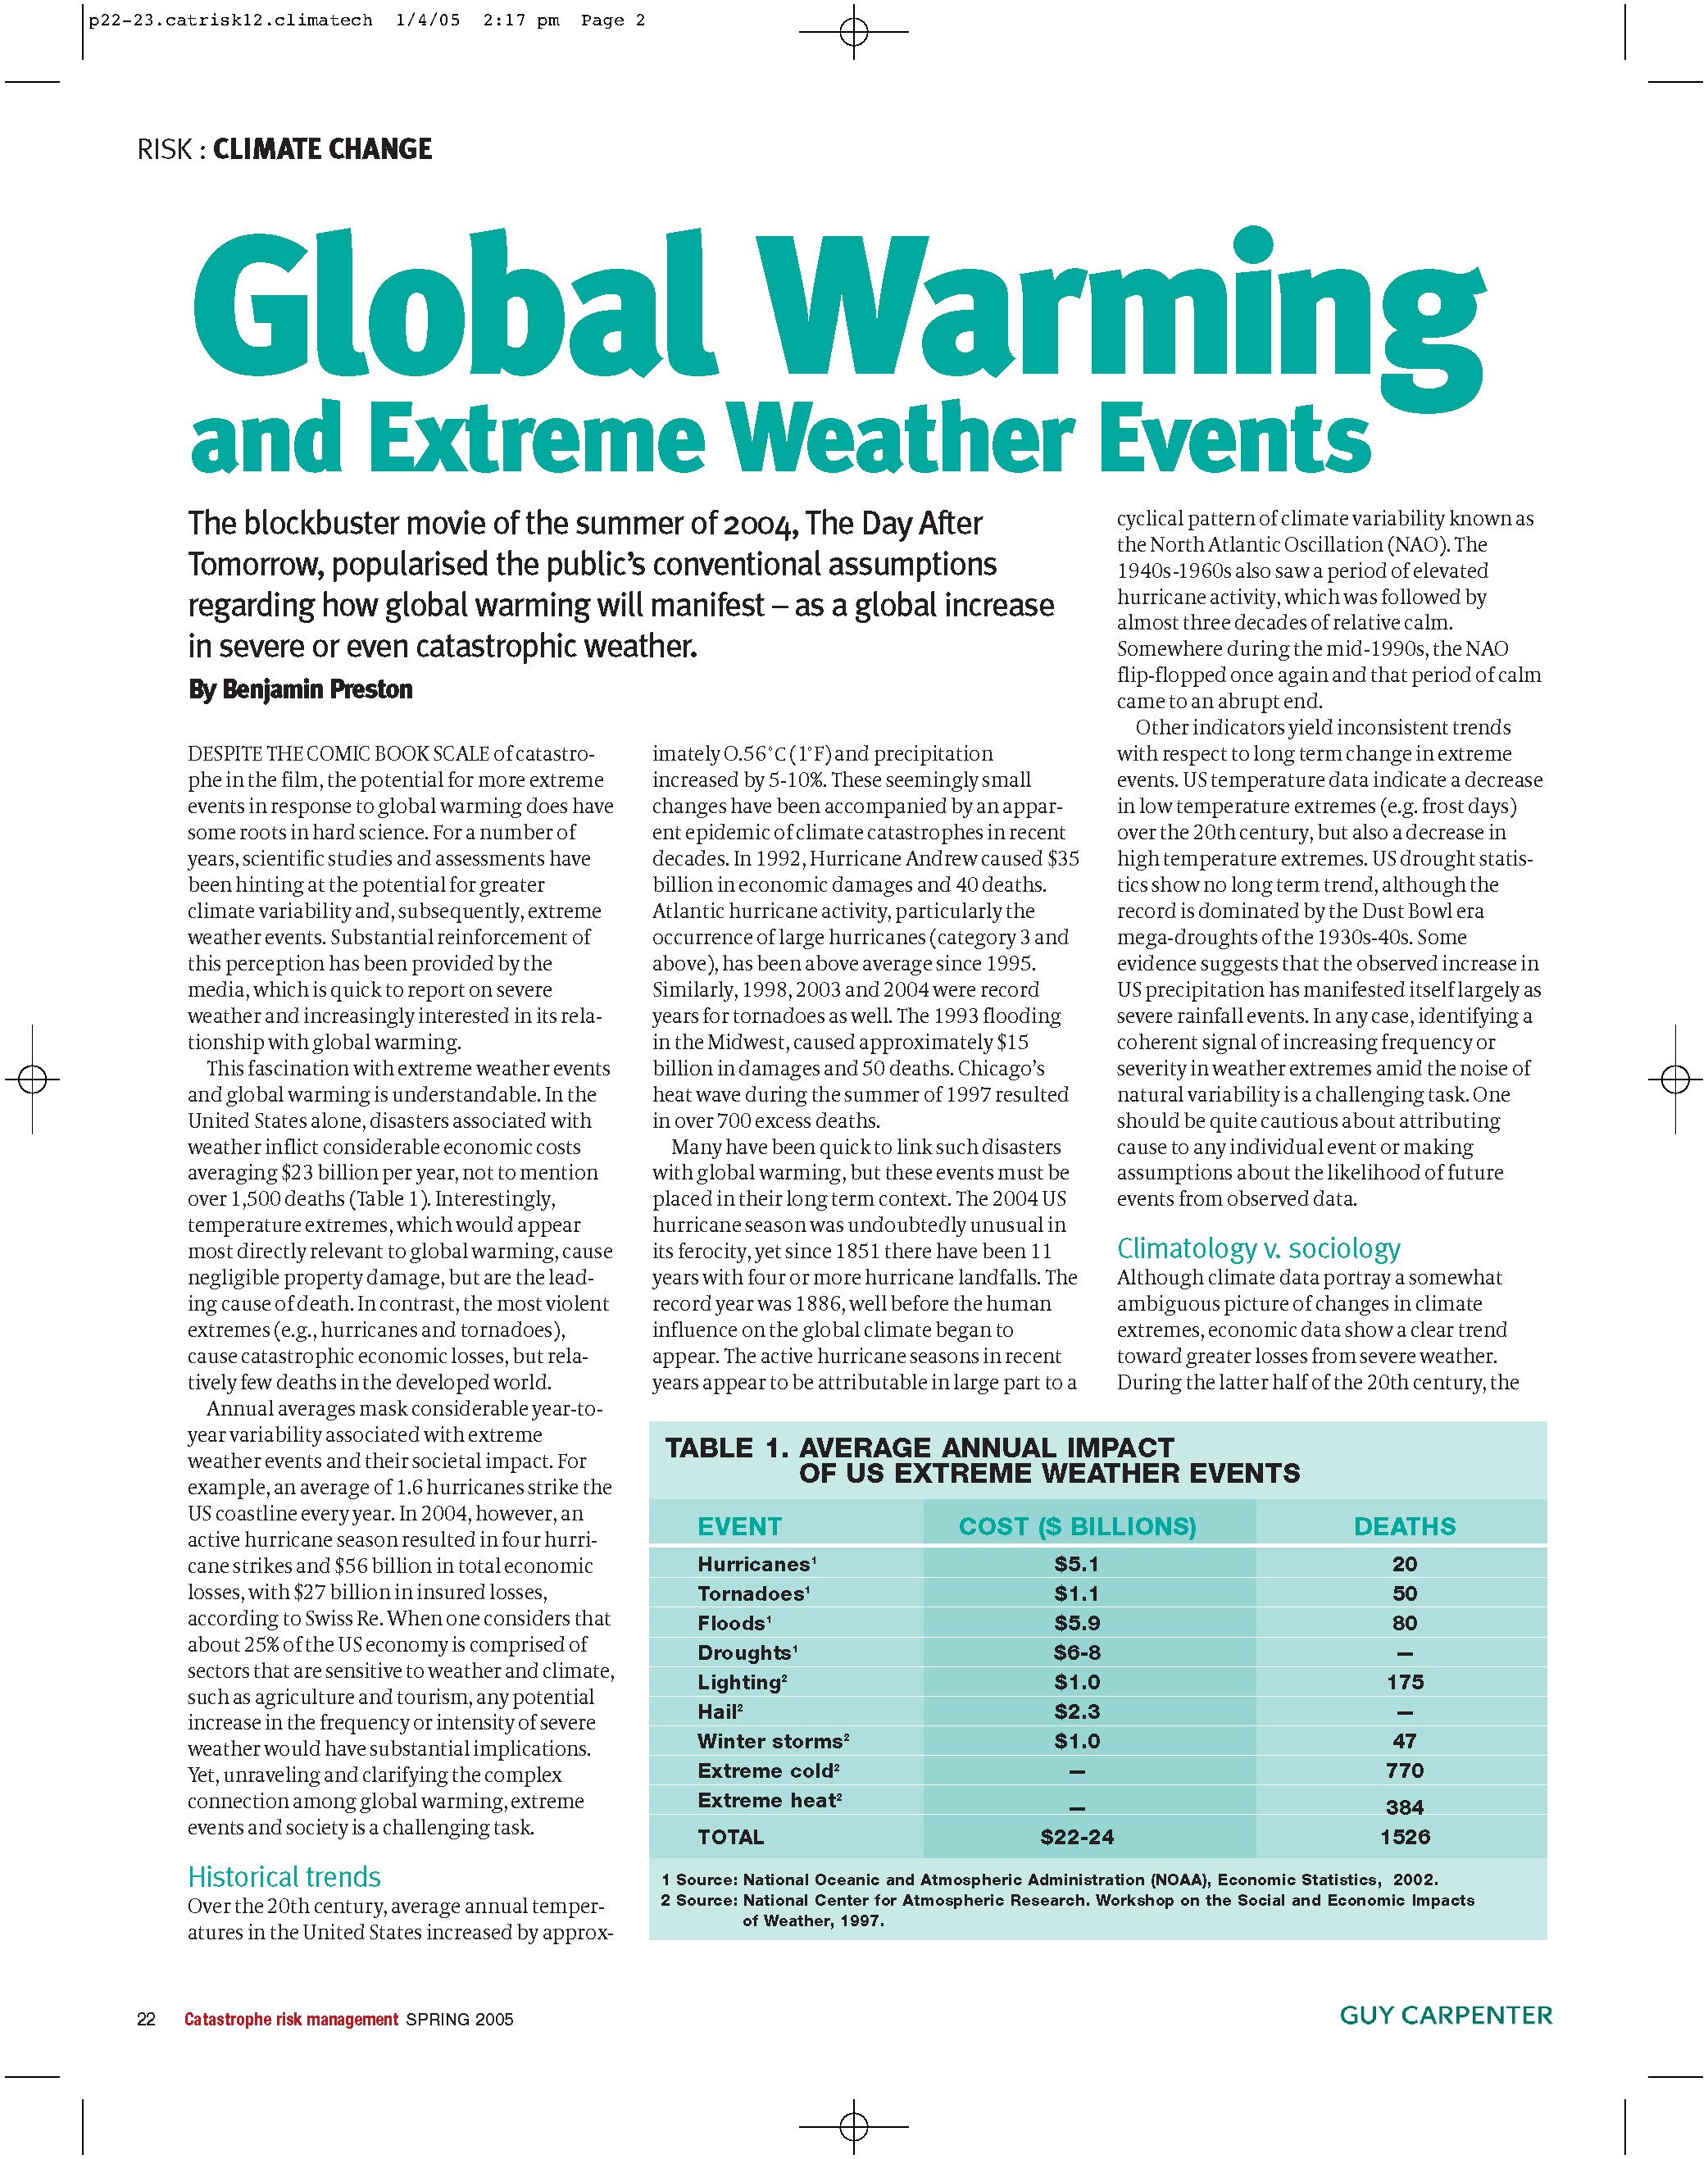 article review on global warming